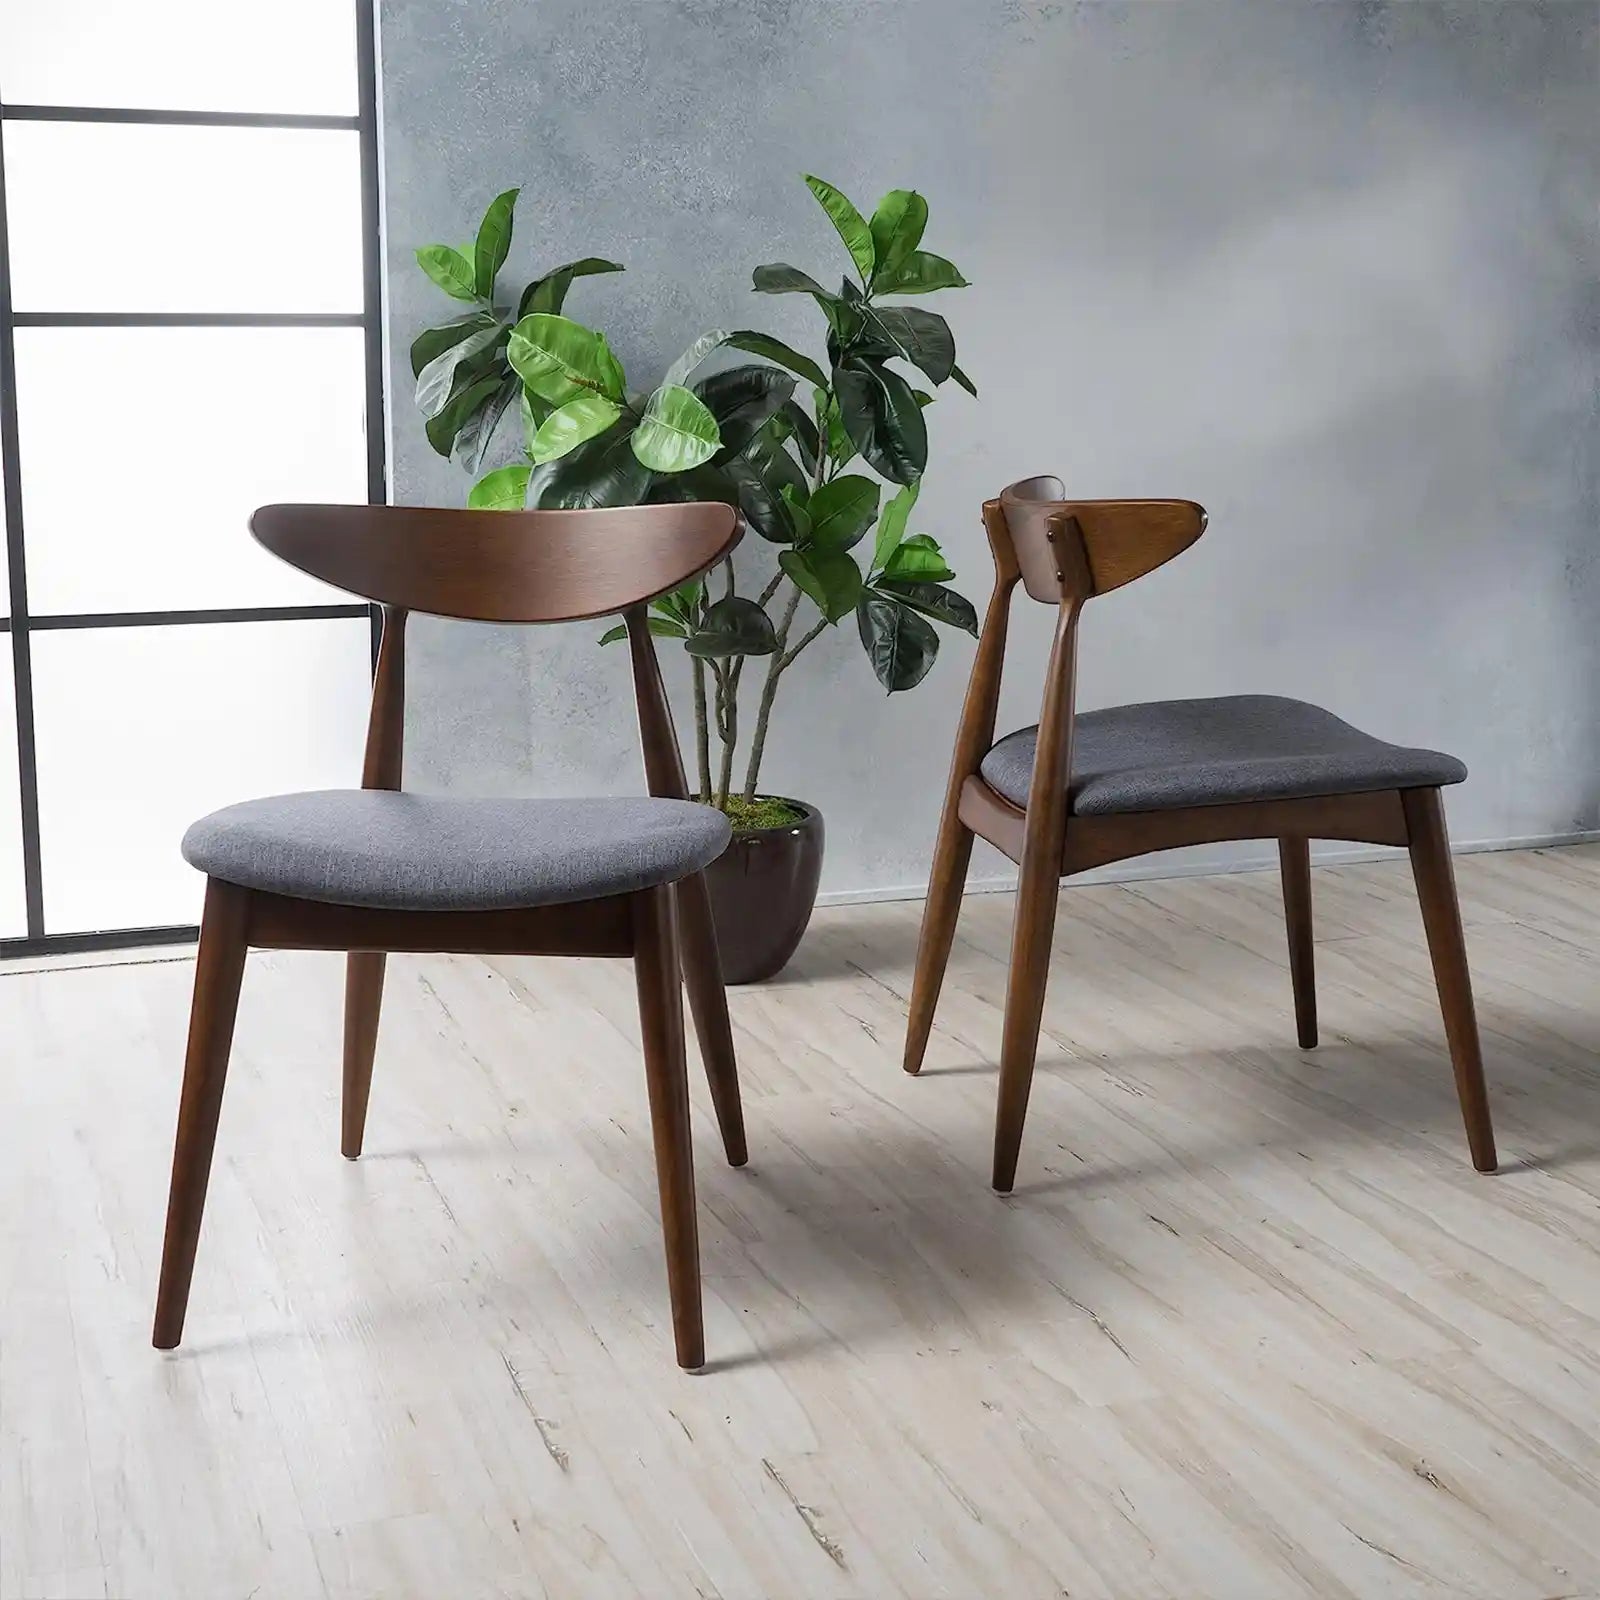 Wooden Dining Chairs, 2-Pcs Set, Charcoal